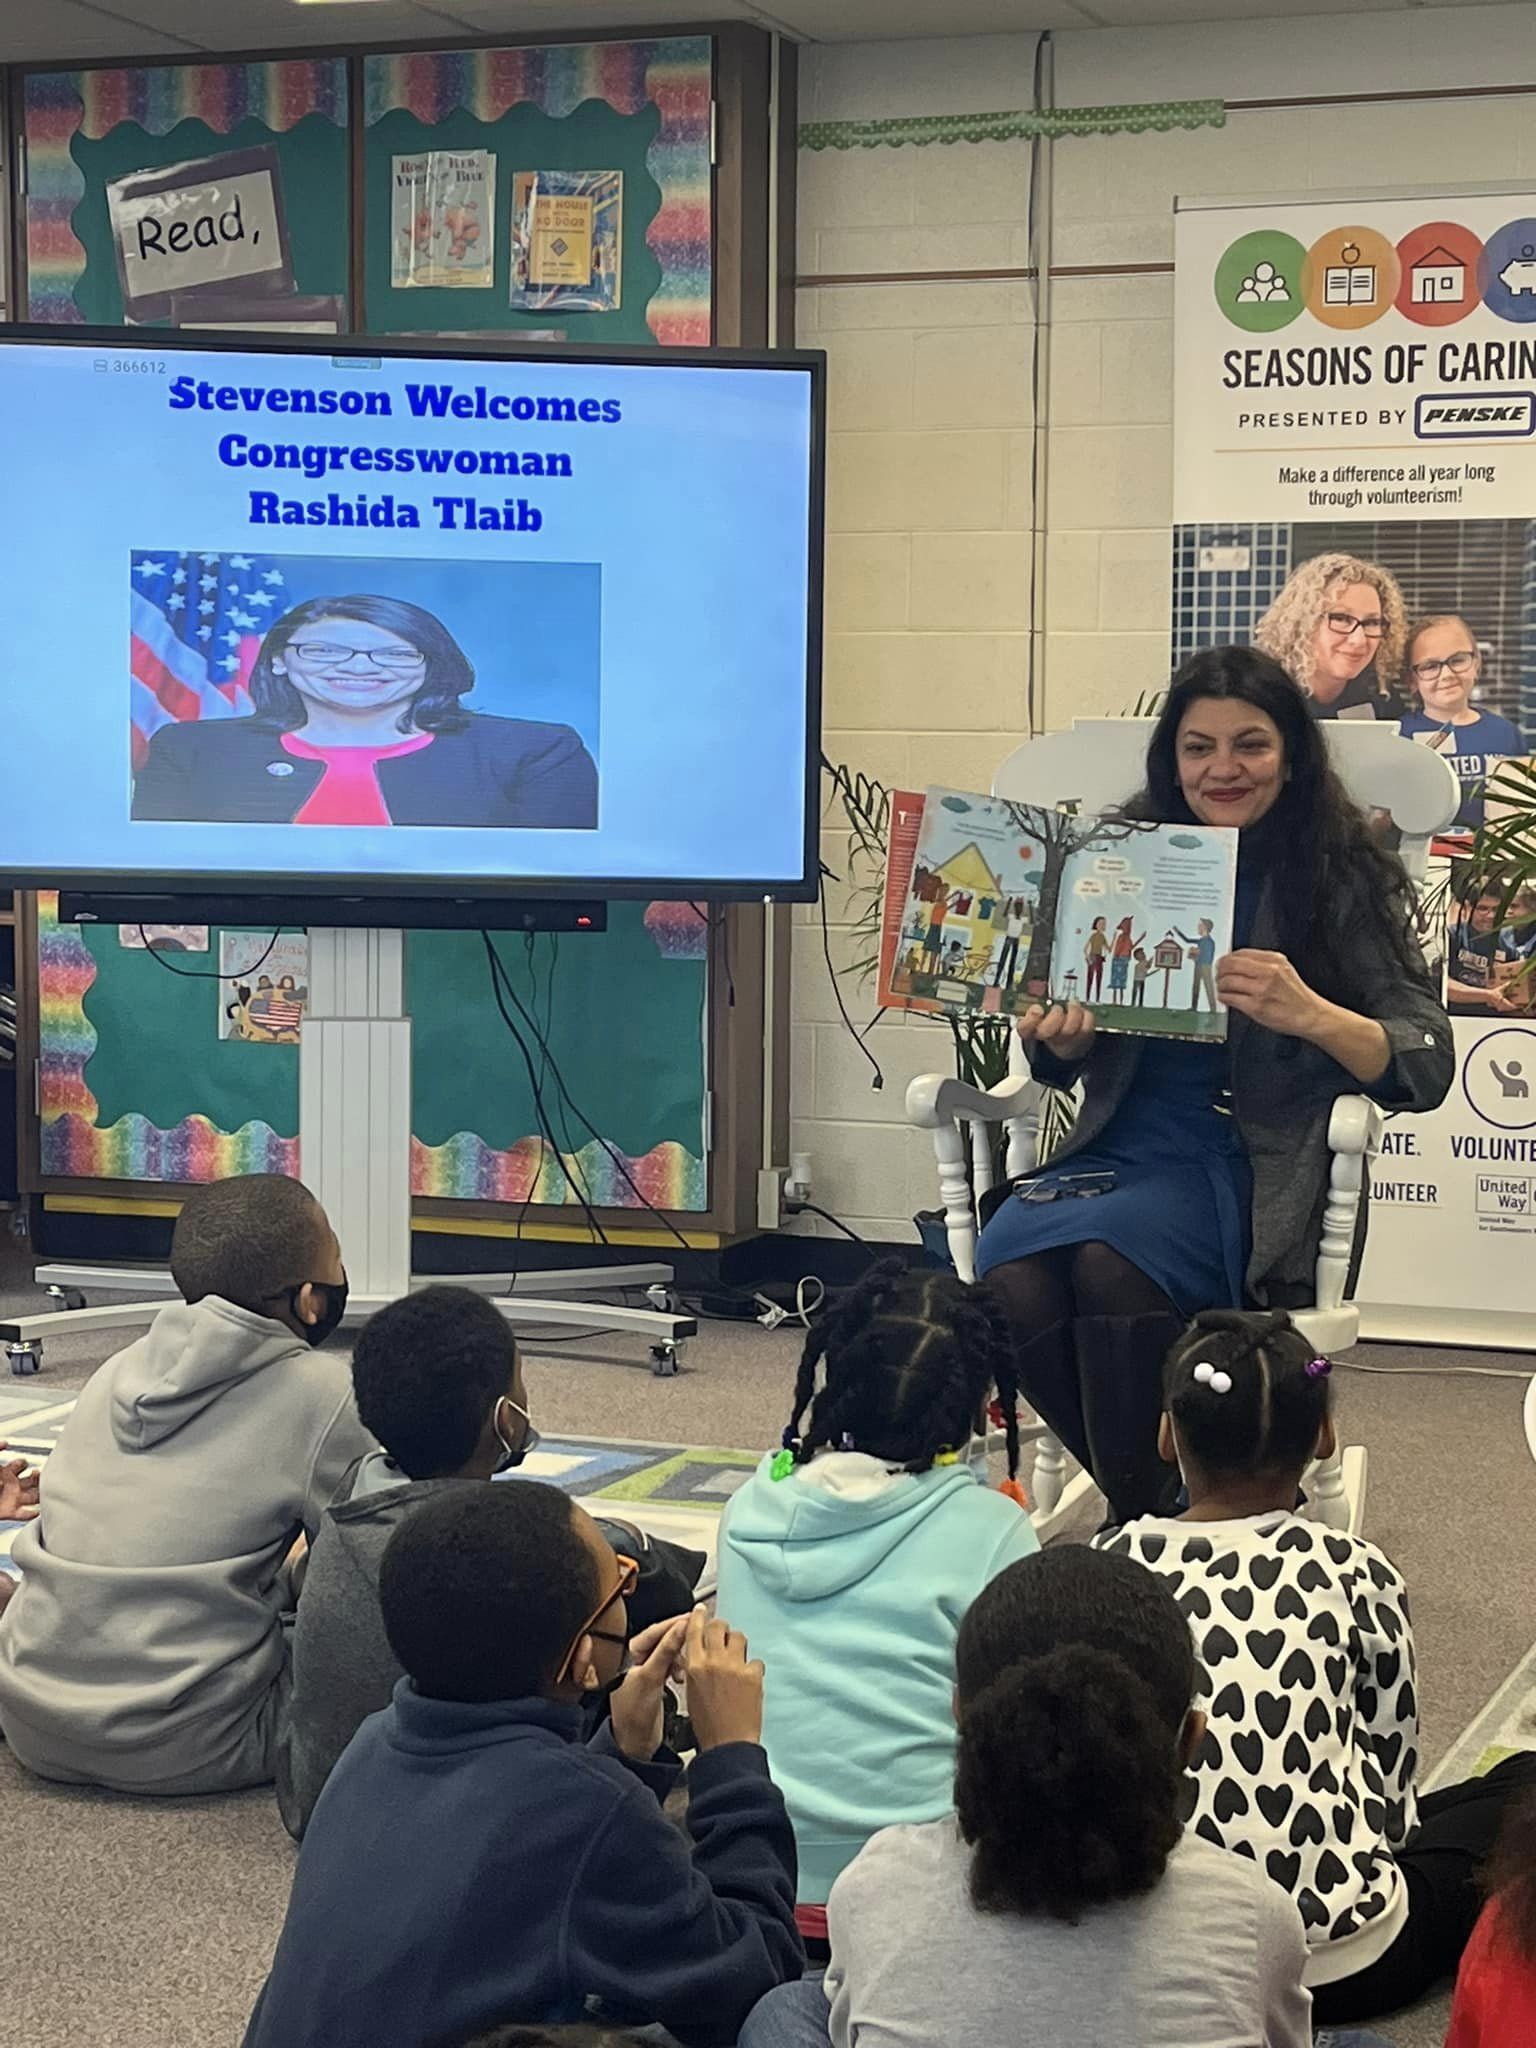 Reading to Students